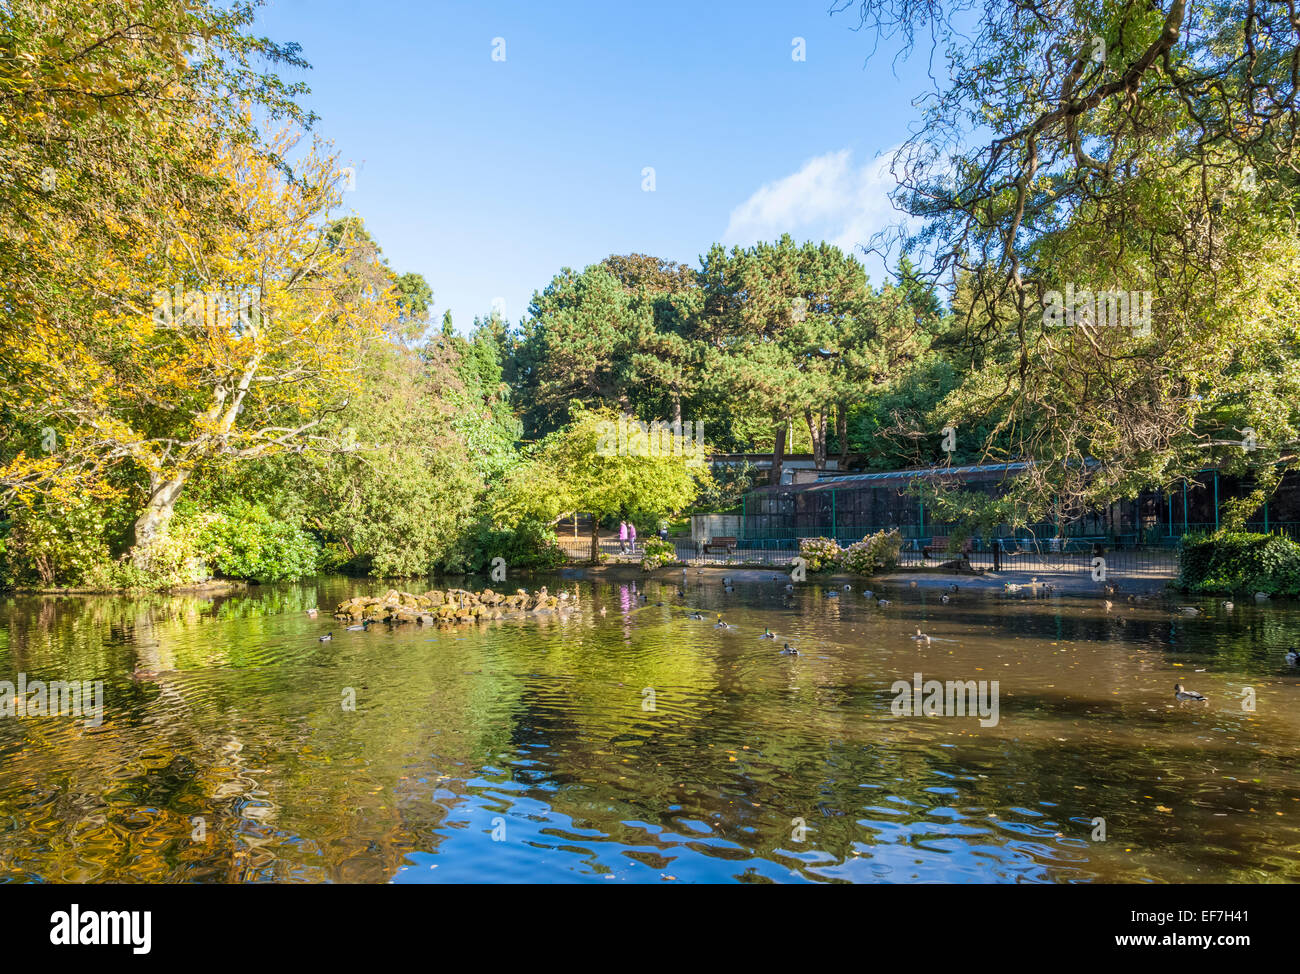 The lake at the Arboretum, a public park in the city of Nottingham, England, UK Stock Photo